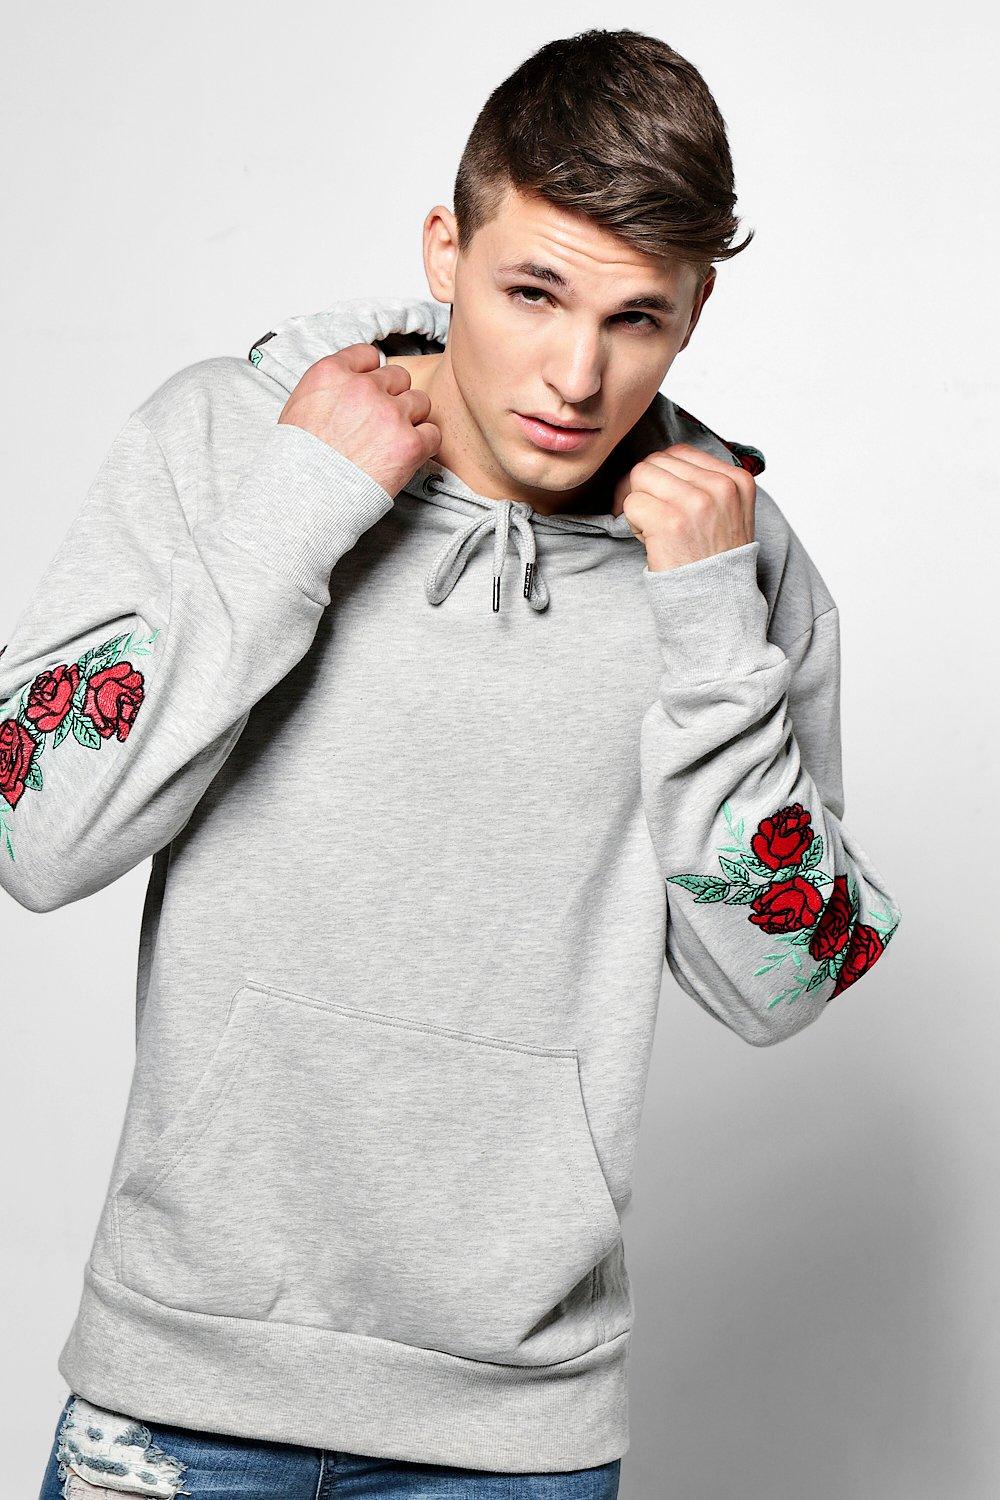 mens hoodie with rose embroidery